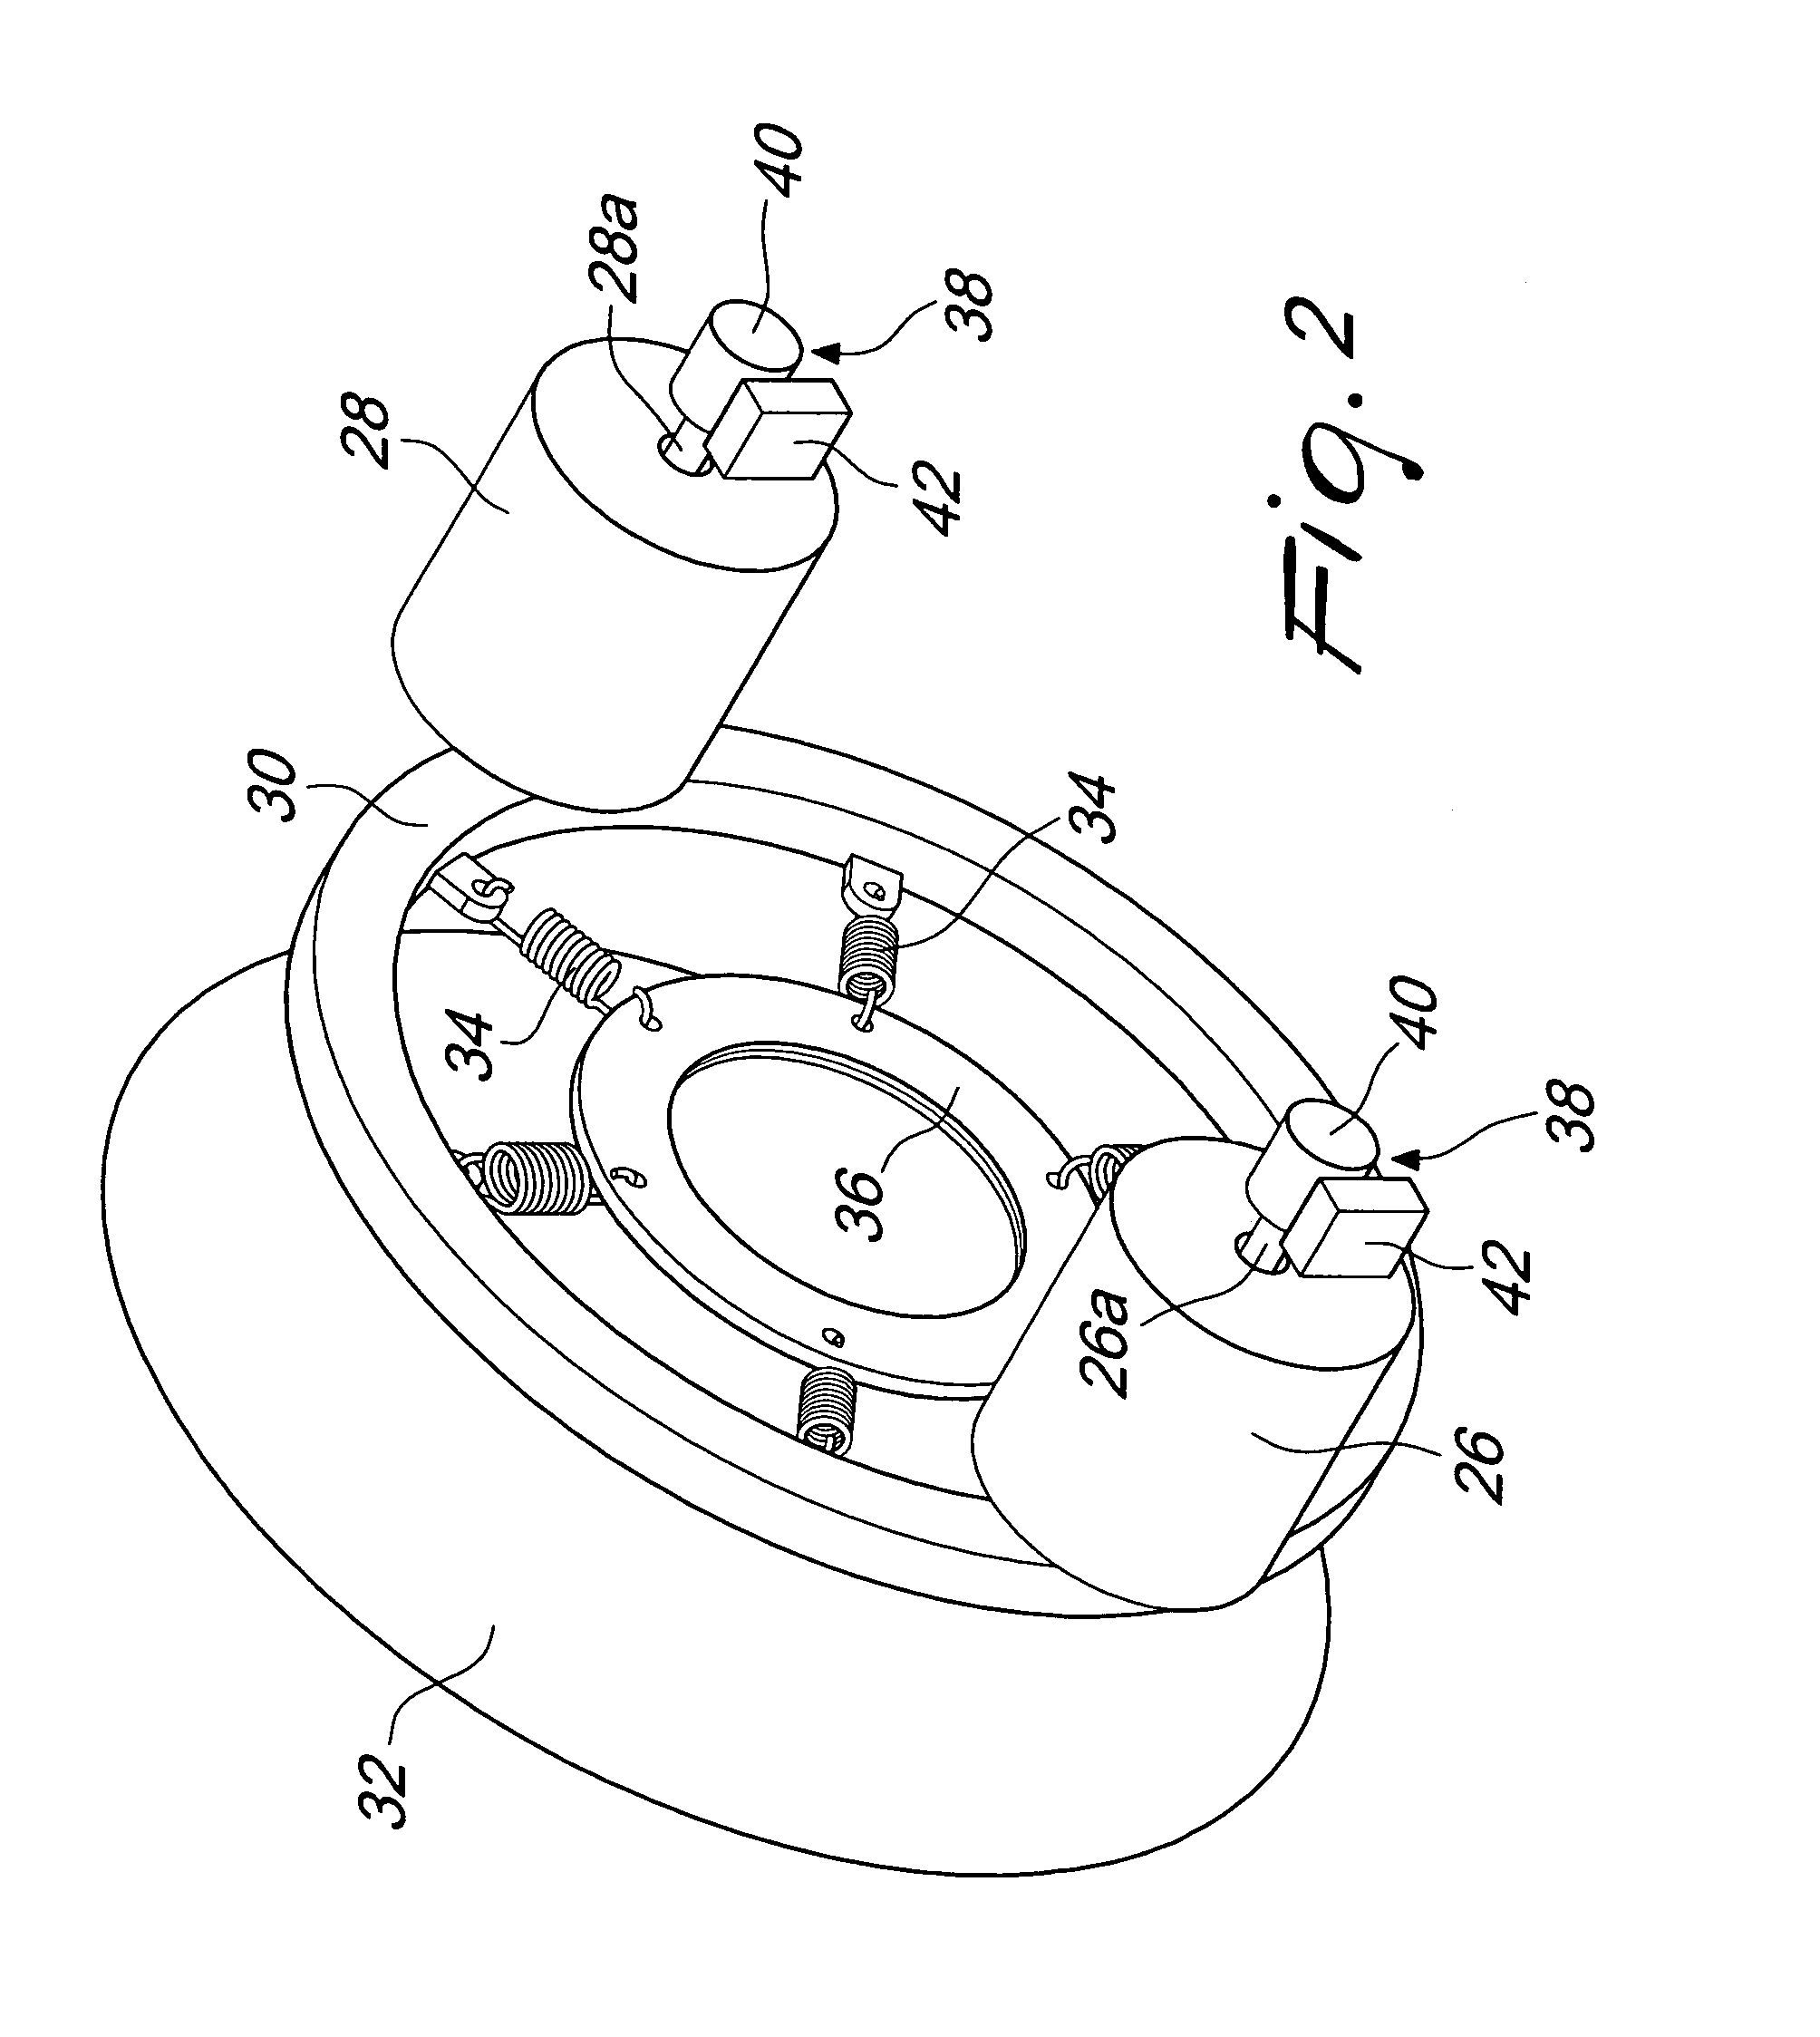 Control unit for yarn-braking devices in weft feeders for looms, and tuning method therefor